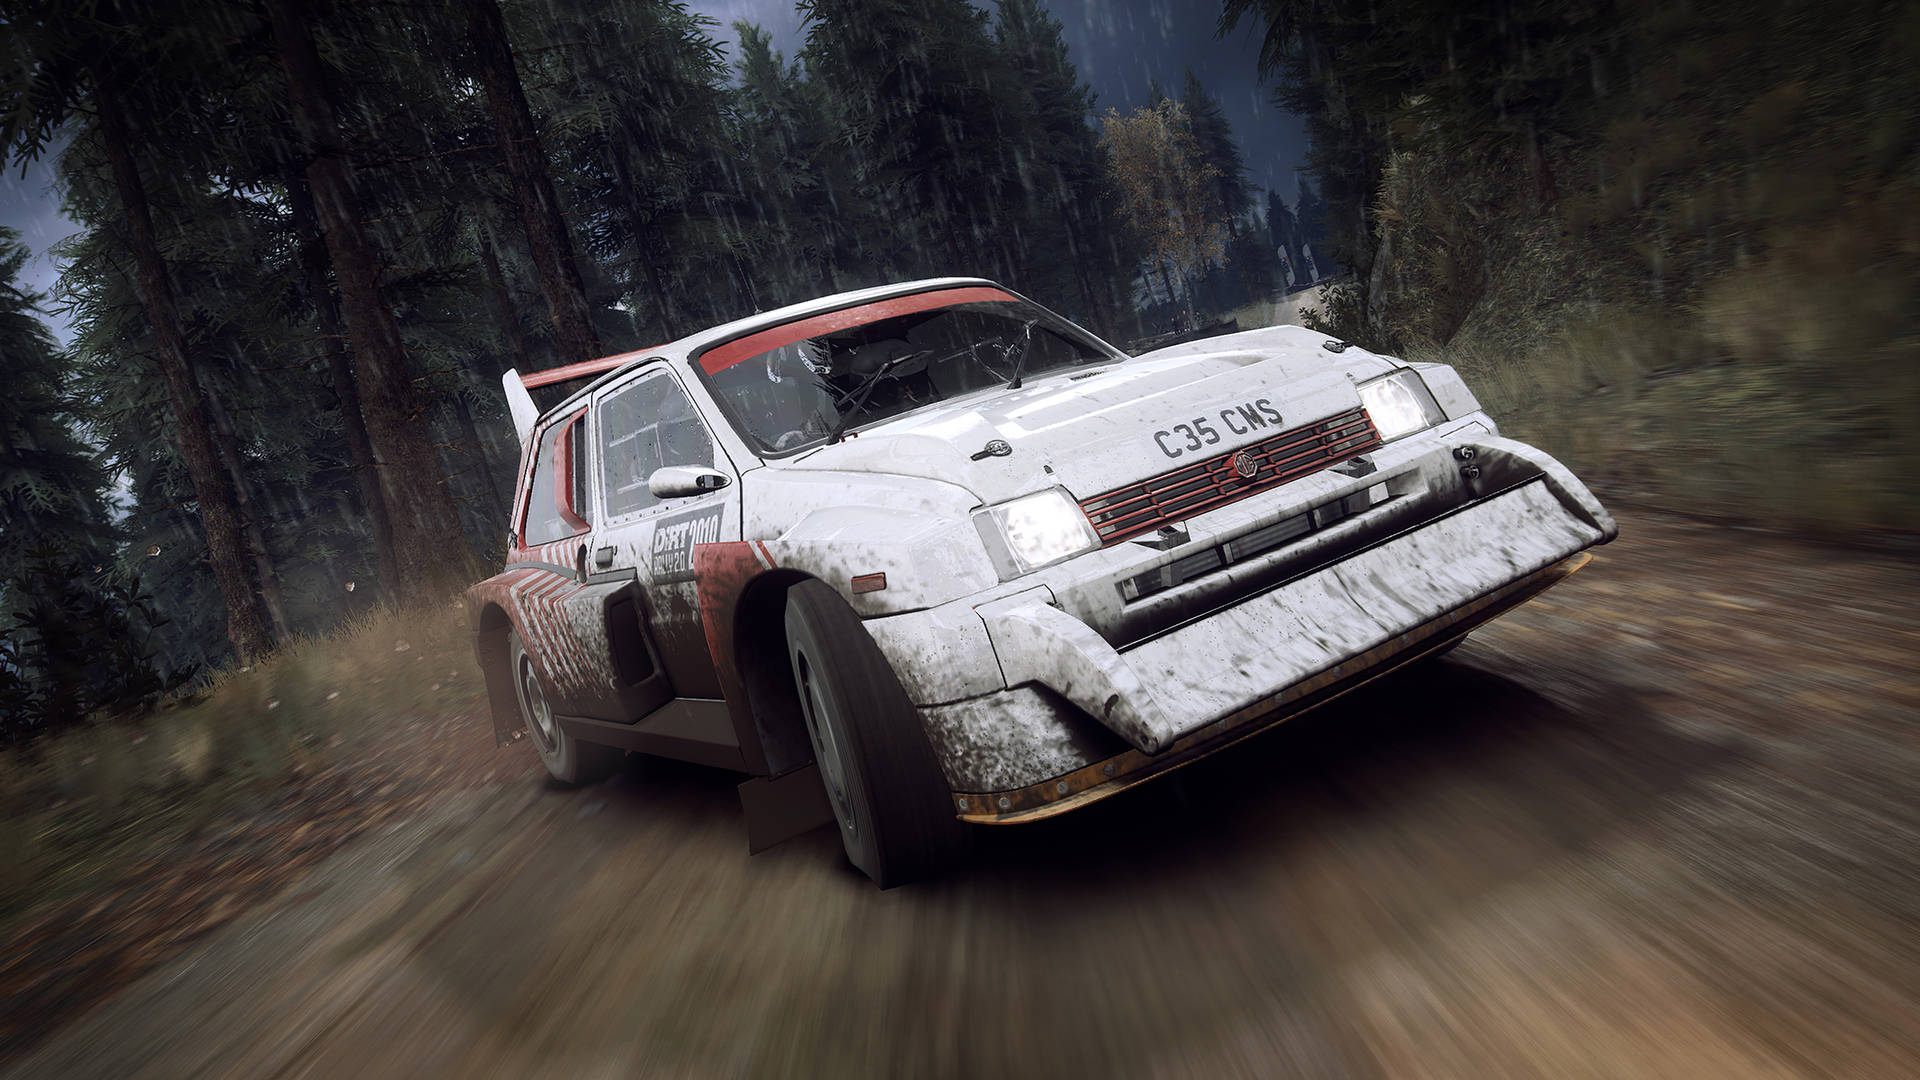 Intense Racing Action With Dirt Rally's Mg Metro 6r4 Background